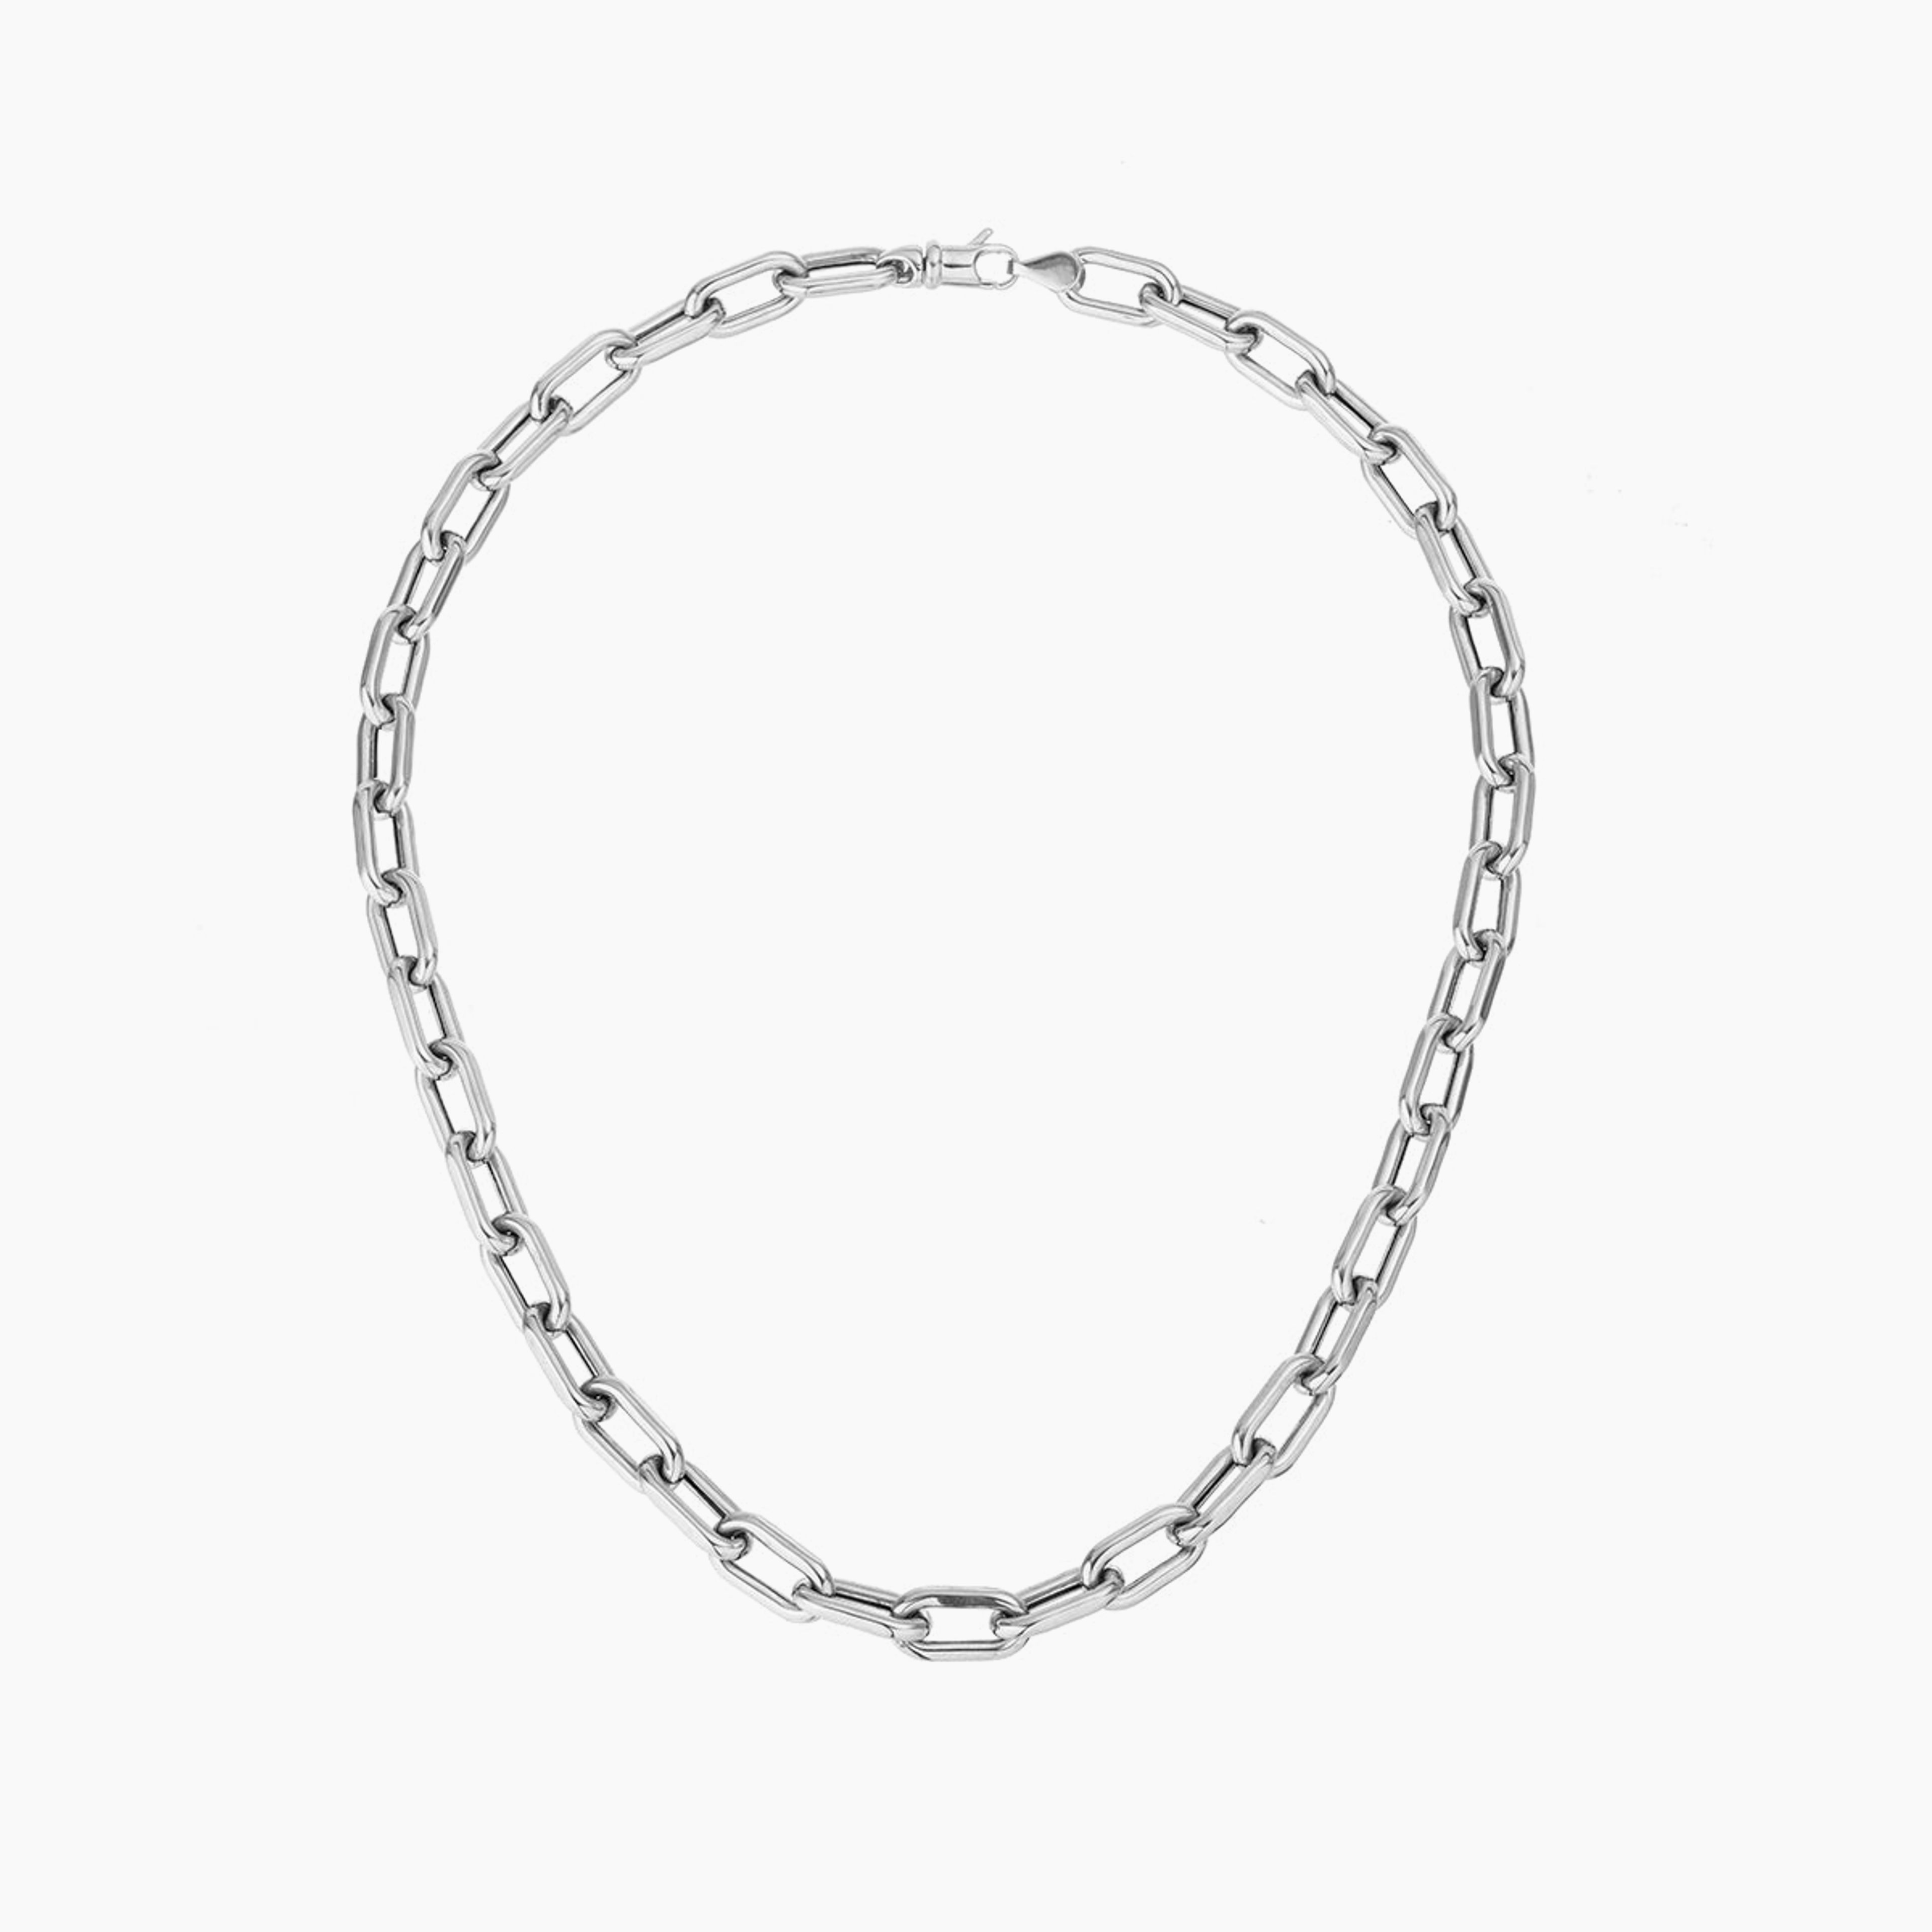 7mm Italian Chain Link Necklace in Sterling Silver